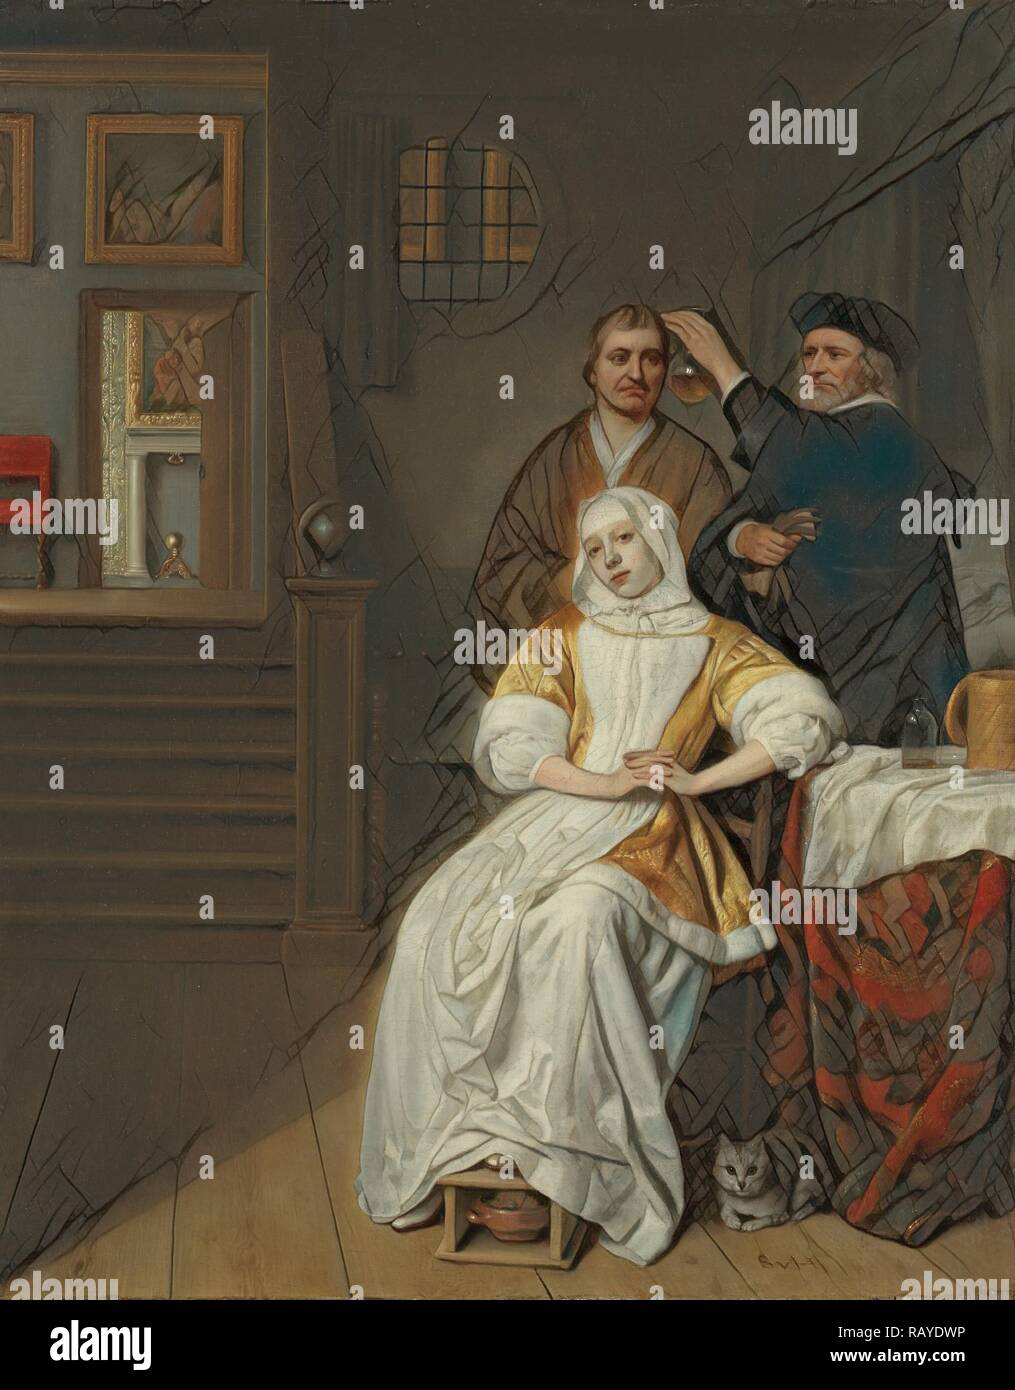 The Anemic Lady, Sick Lady, Samuel van Hoogstraten, 1660 - 1678. Reimagined by Gibon. Classic art with a modern twist reimagined Stock Photo